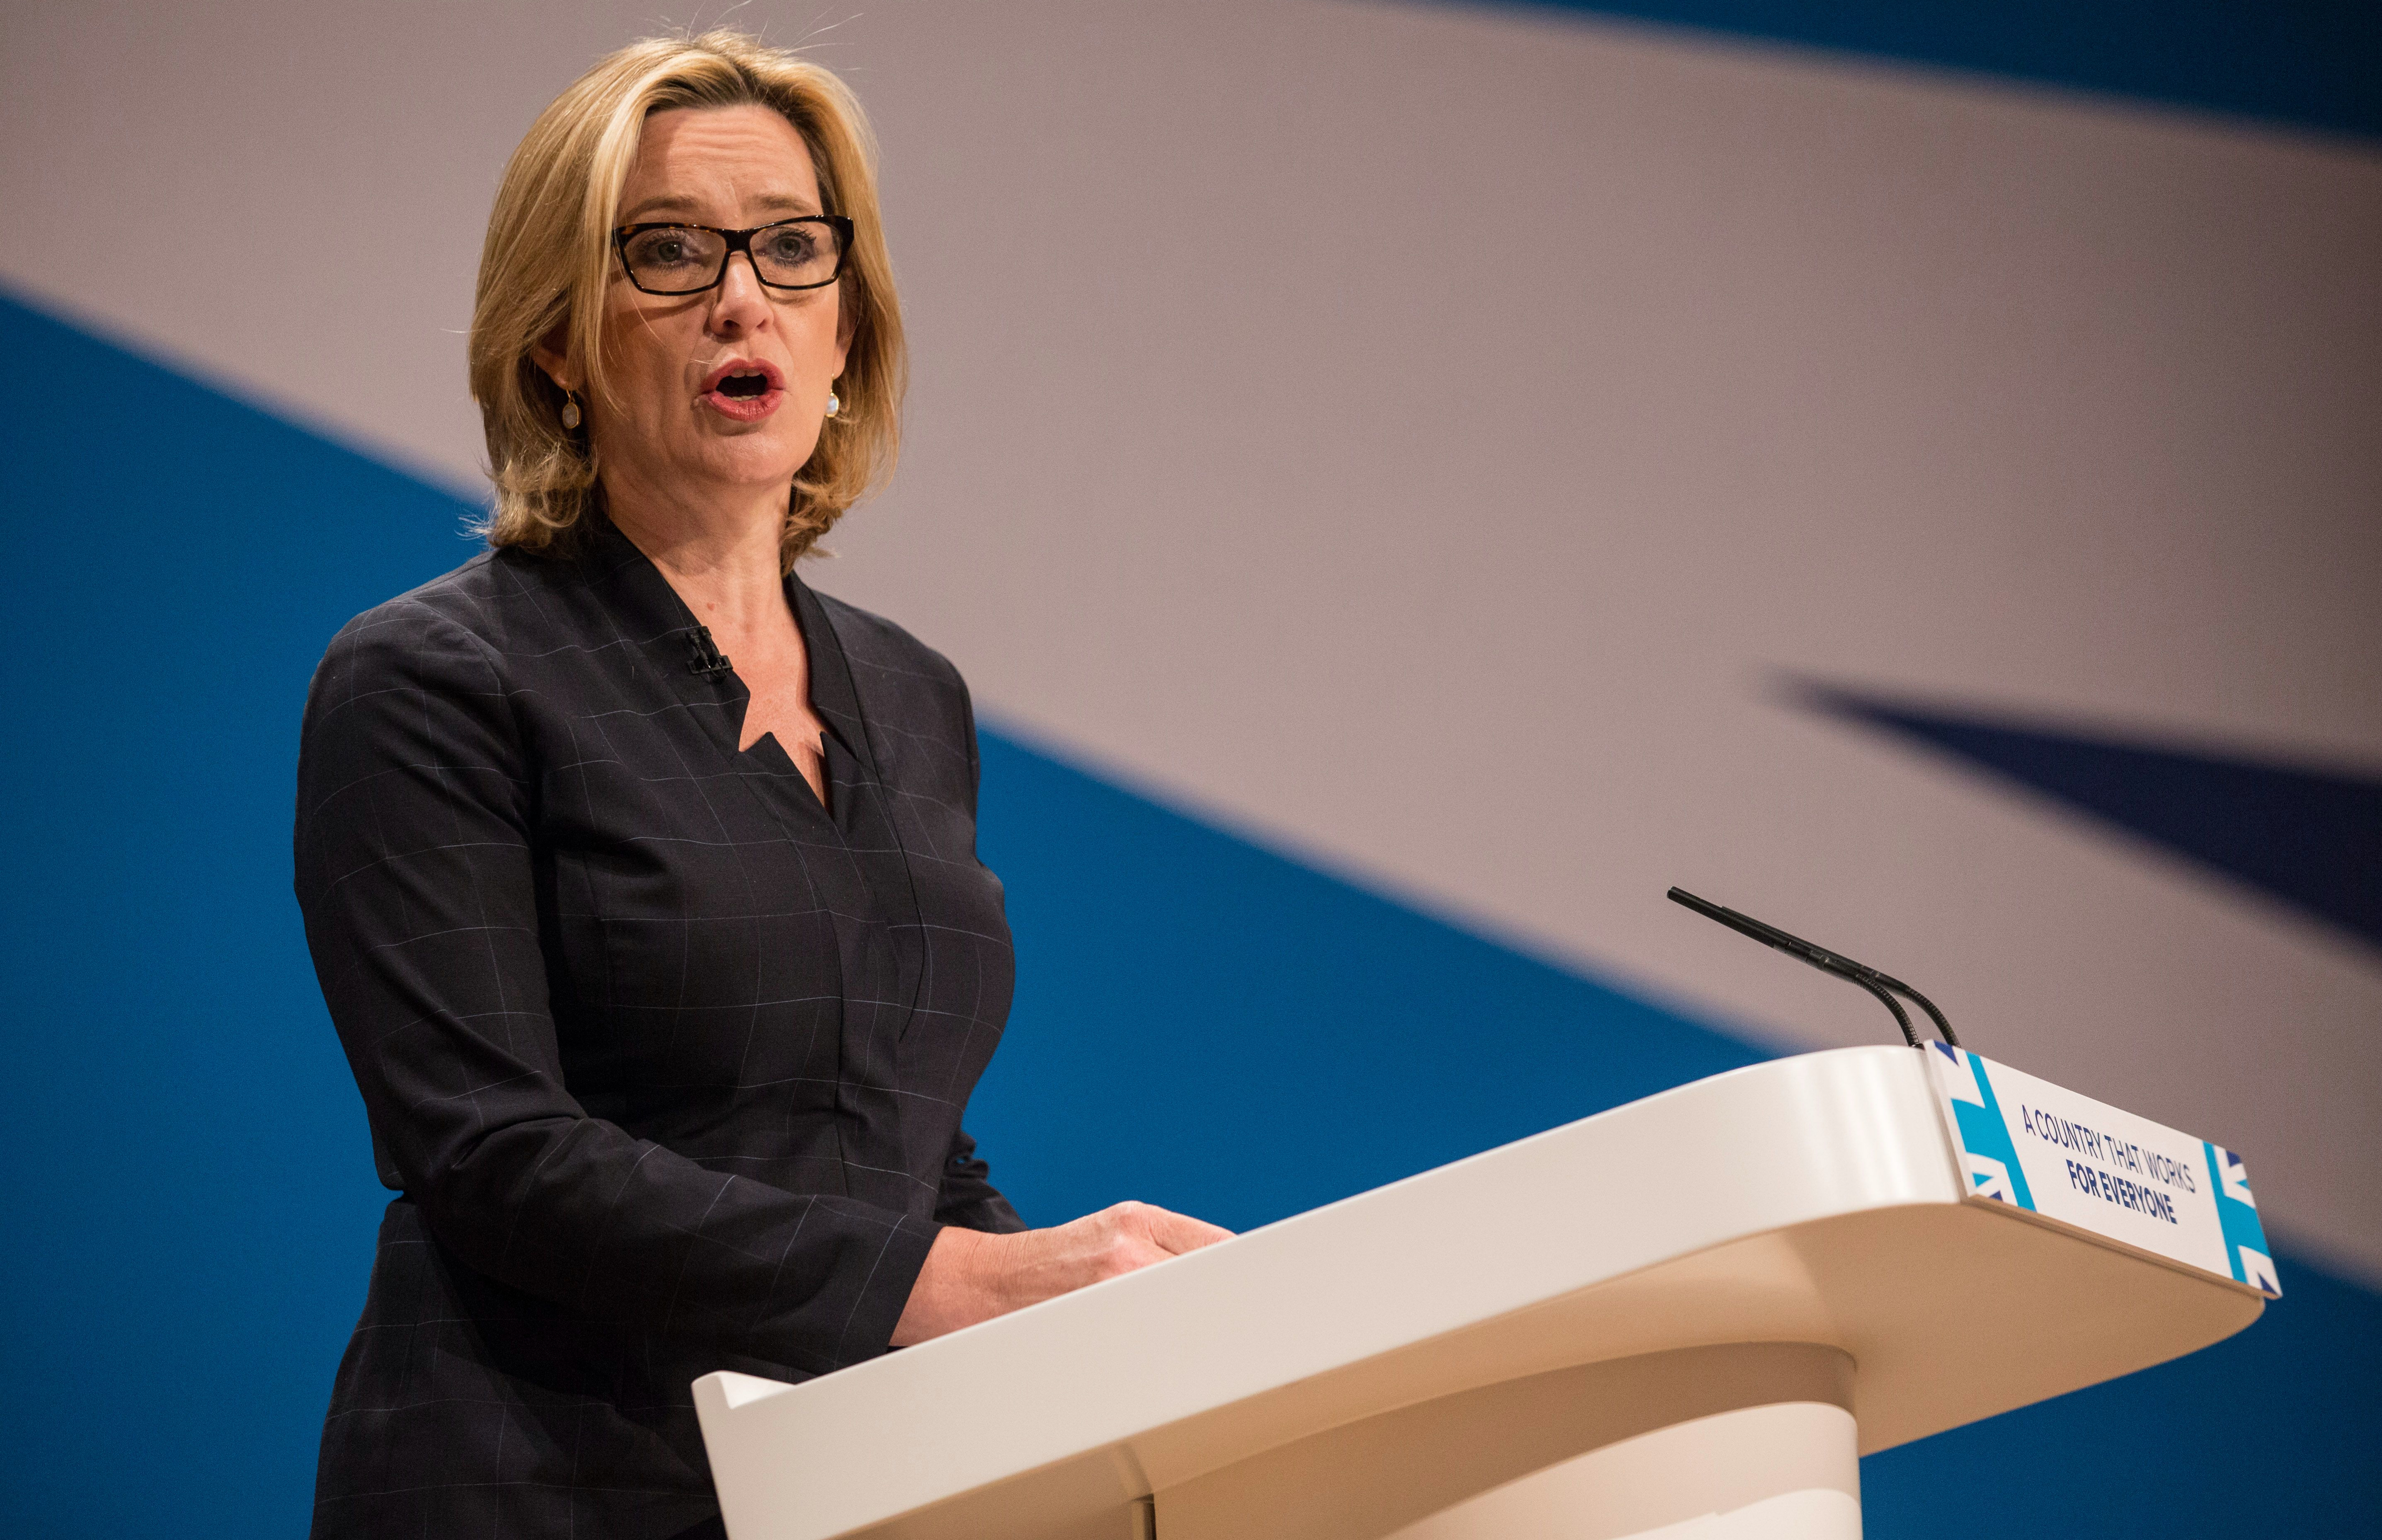 Home secretary to clamp down on international students